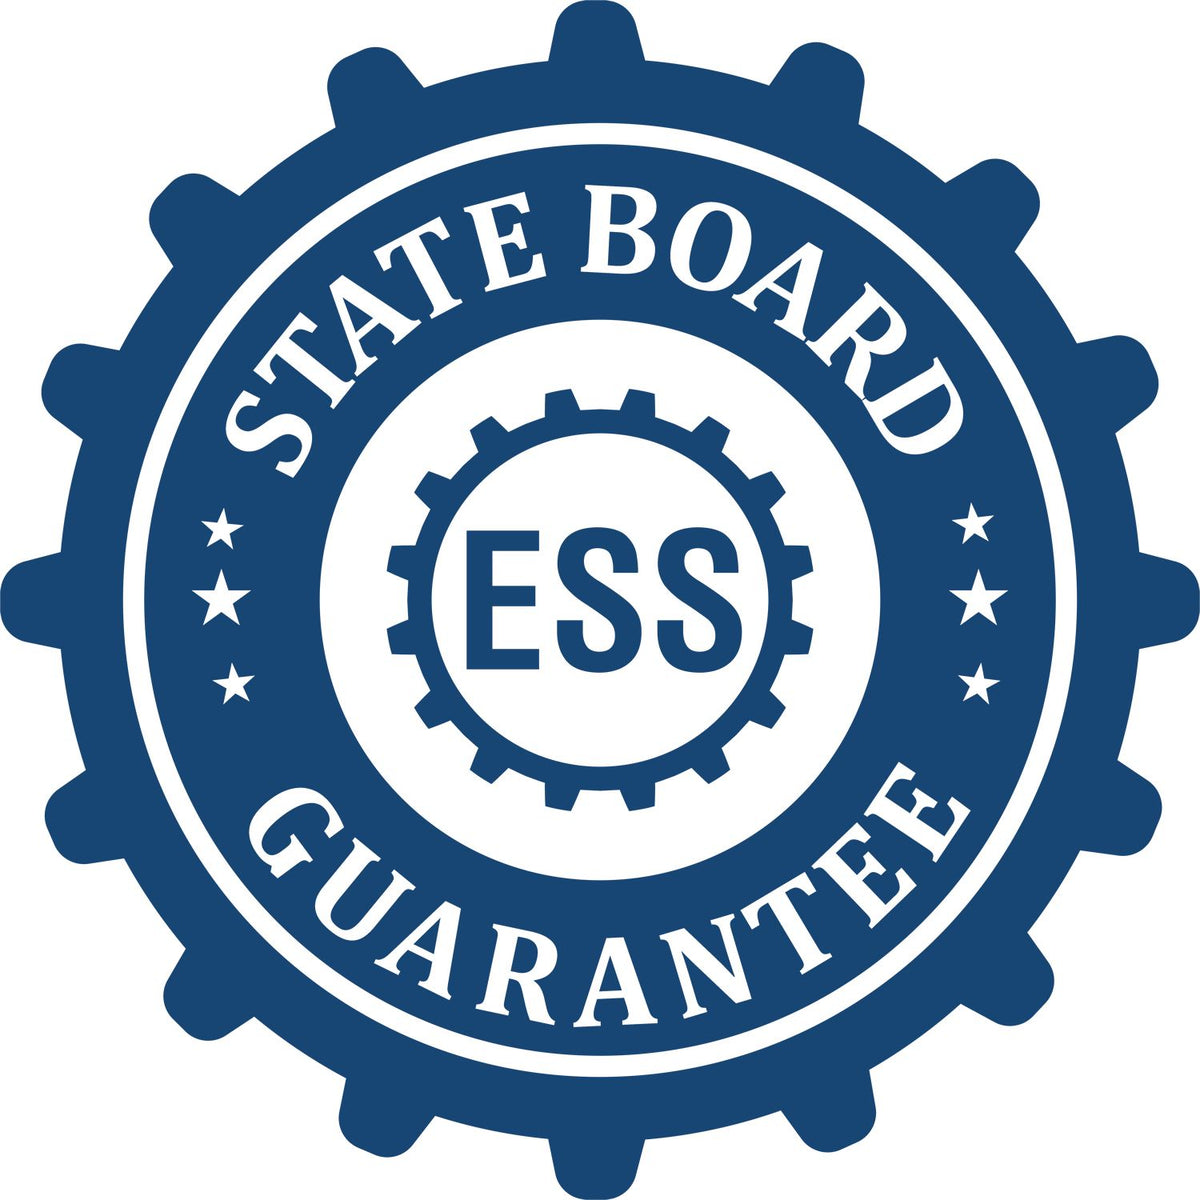 An emblem in a gear shape illustrating a state board guarantee for the Handheld Colorado Land Surveyor Seal product.